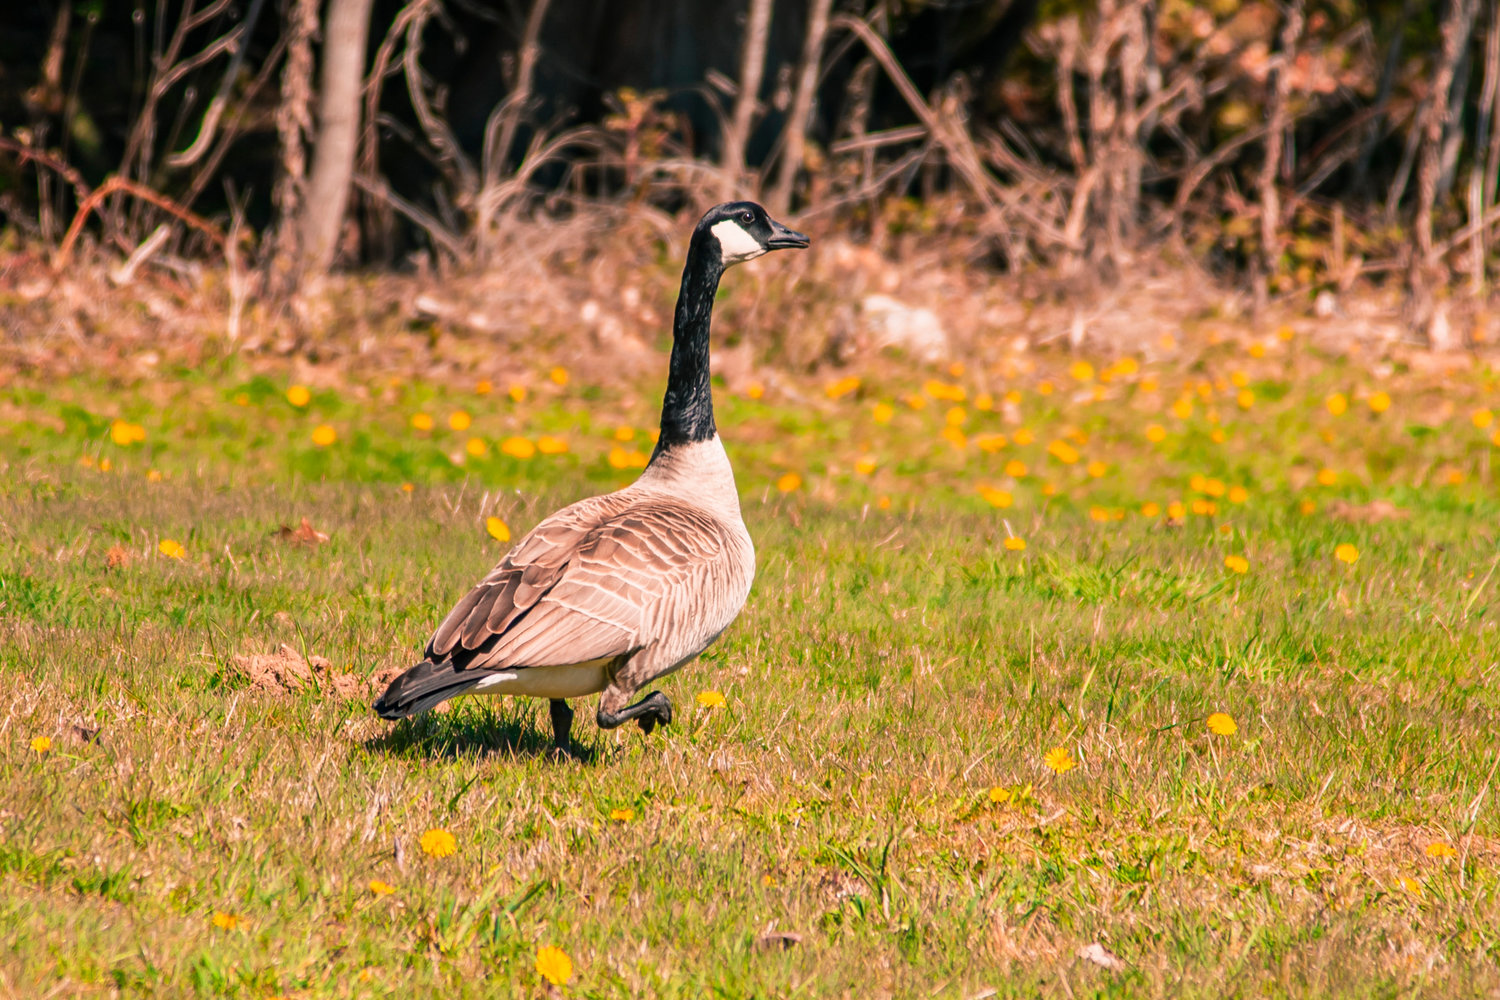 A goose walks through the grass near Mineral Lake Tuesday afternoon.